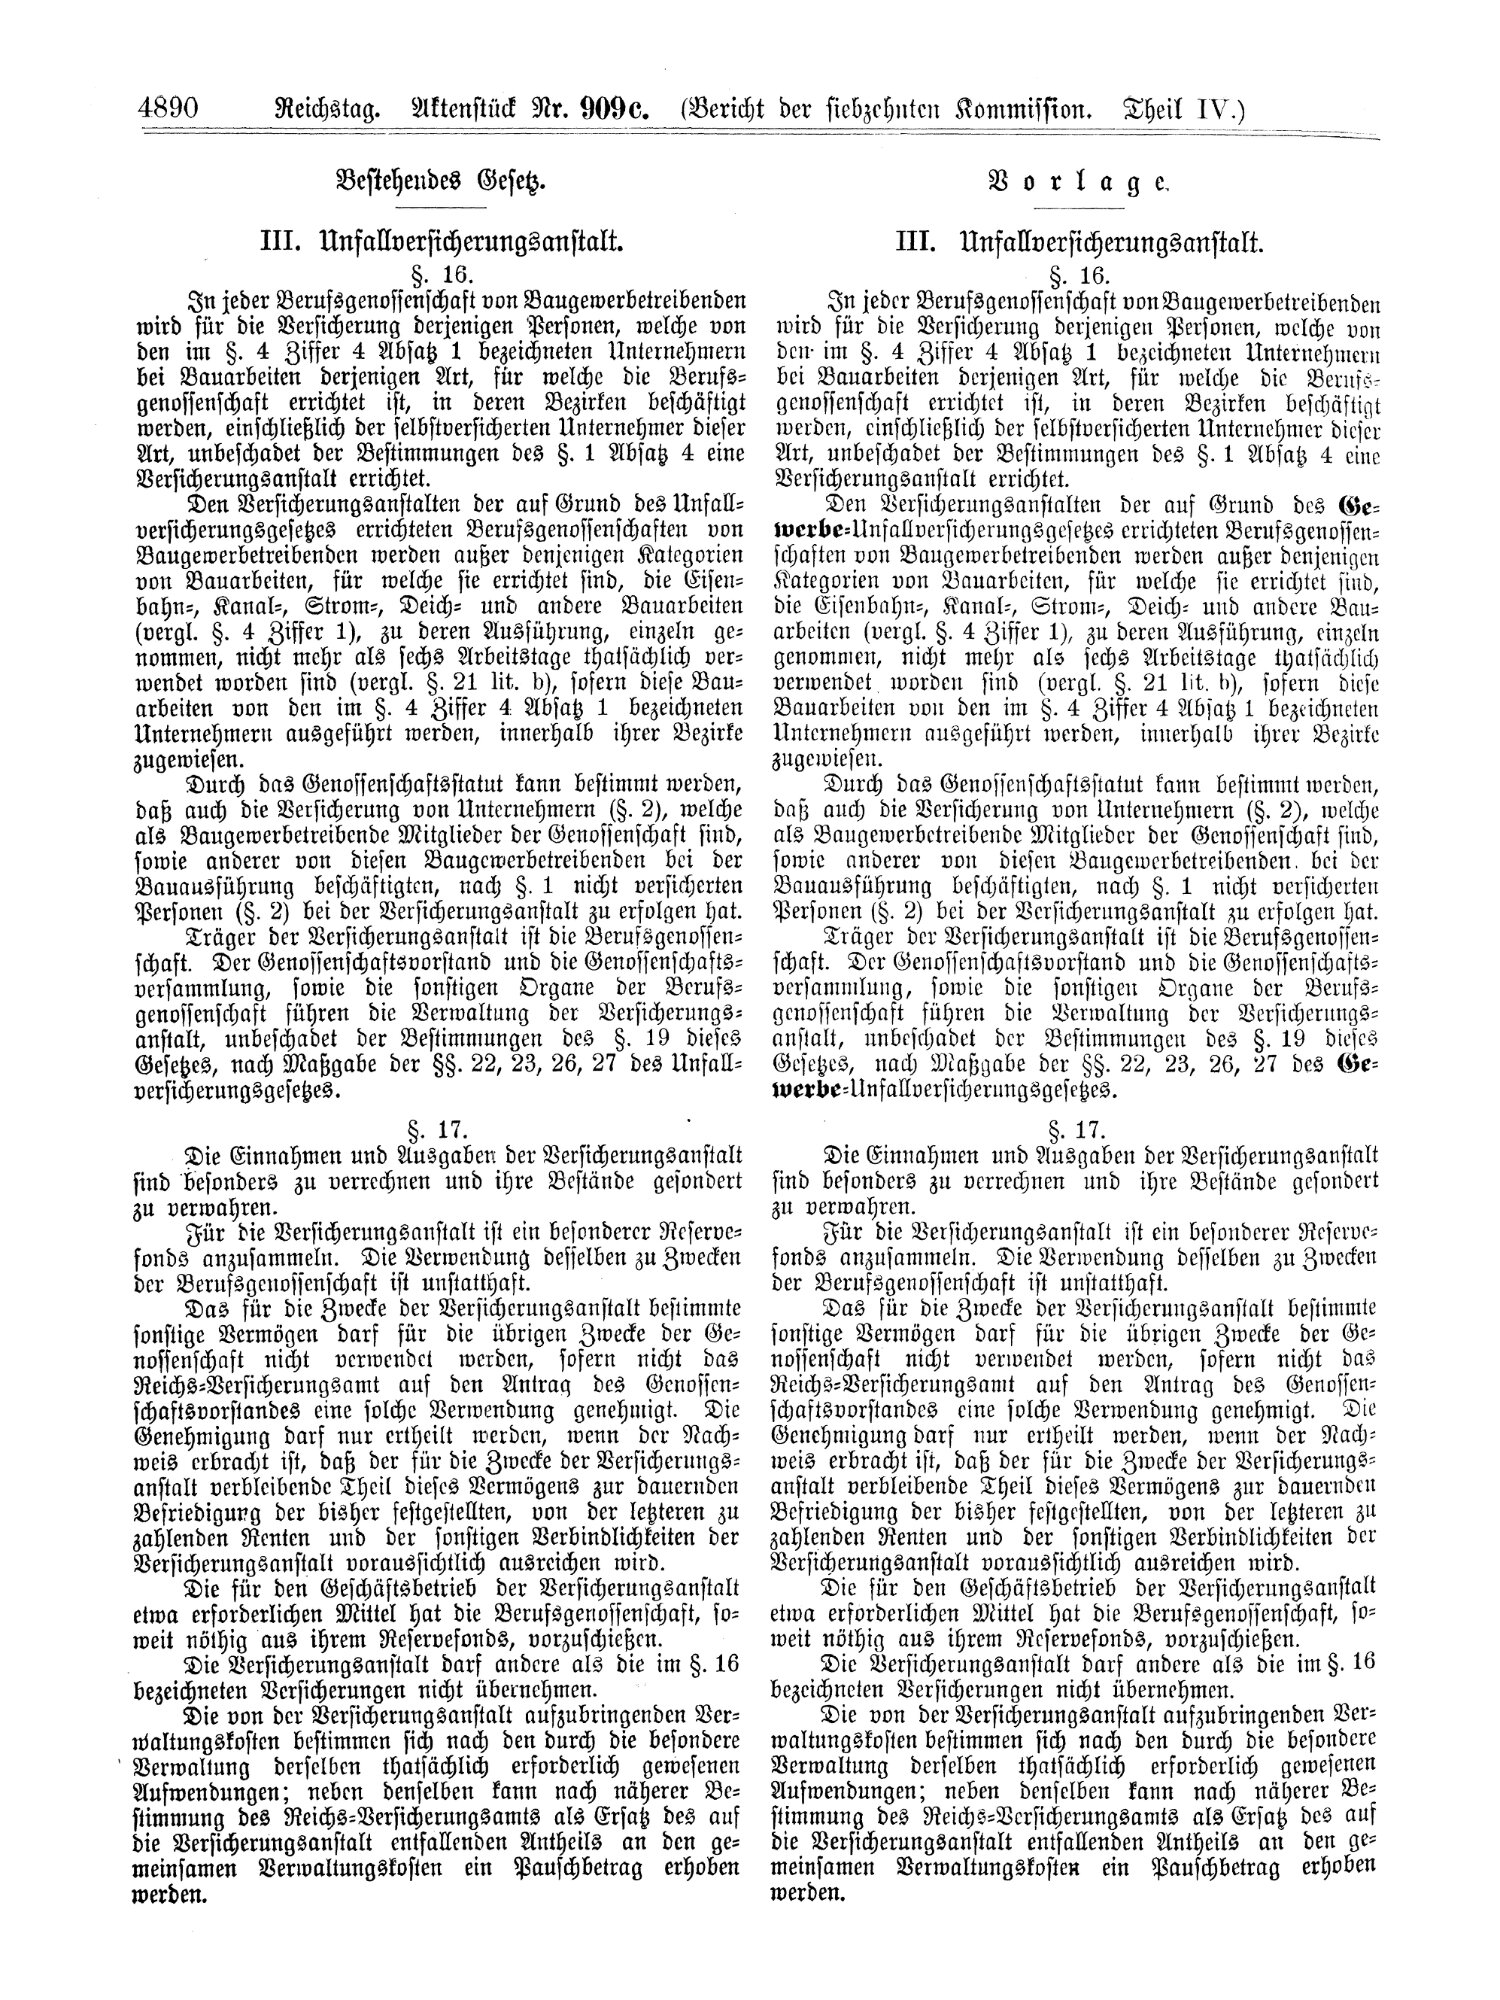 Scan of page 4890